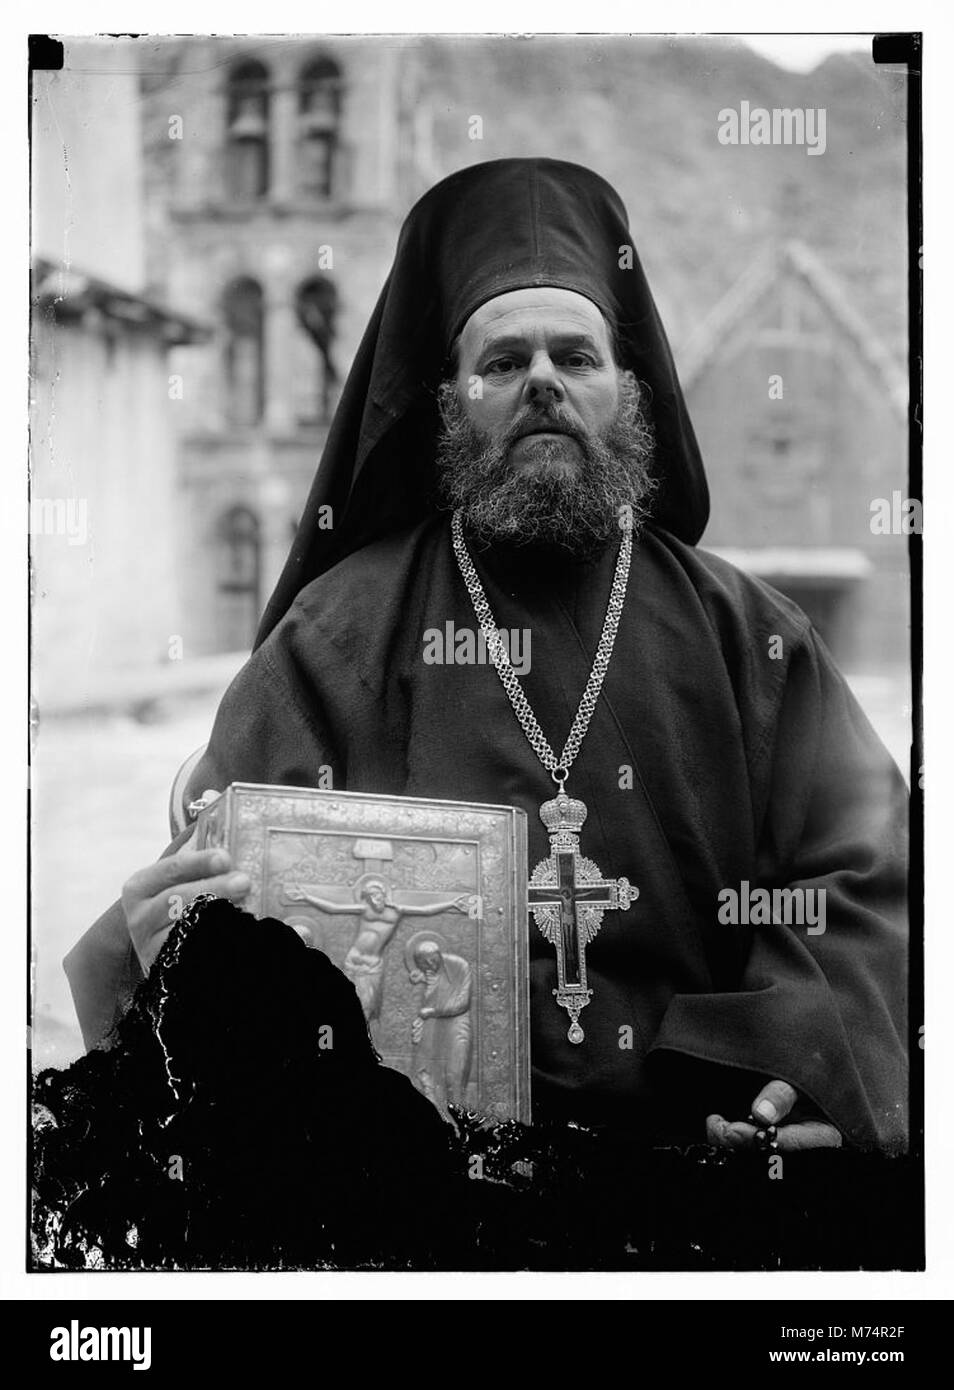 Greek Orthodox priest at St. Catherine's Monastery in the Sinai holding prized manuscript with silver cover from their library LOC matpc.09657 Stock Photo